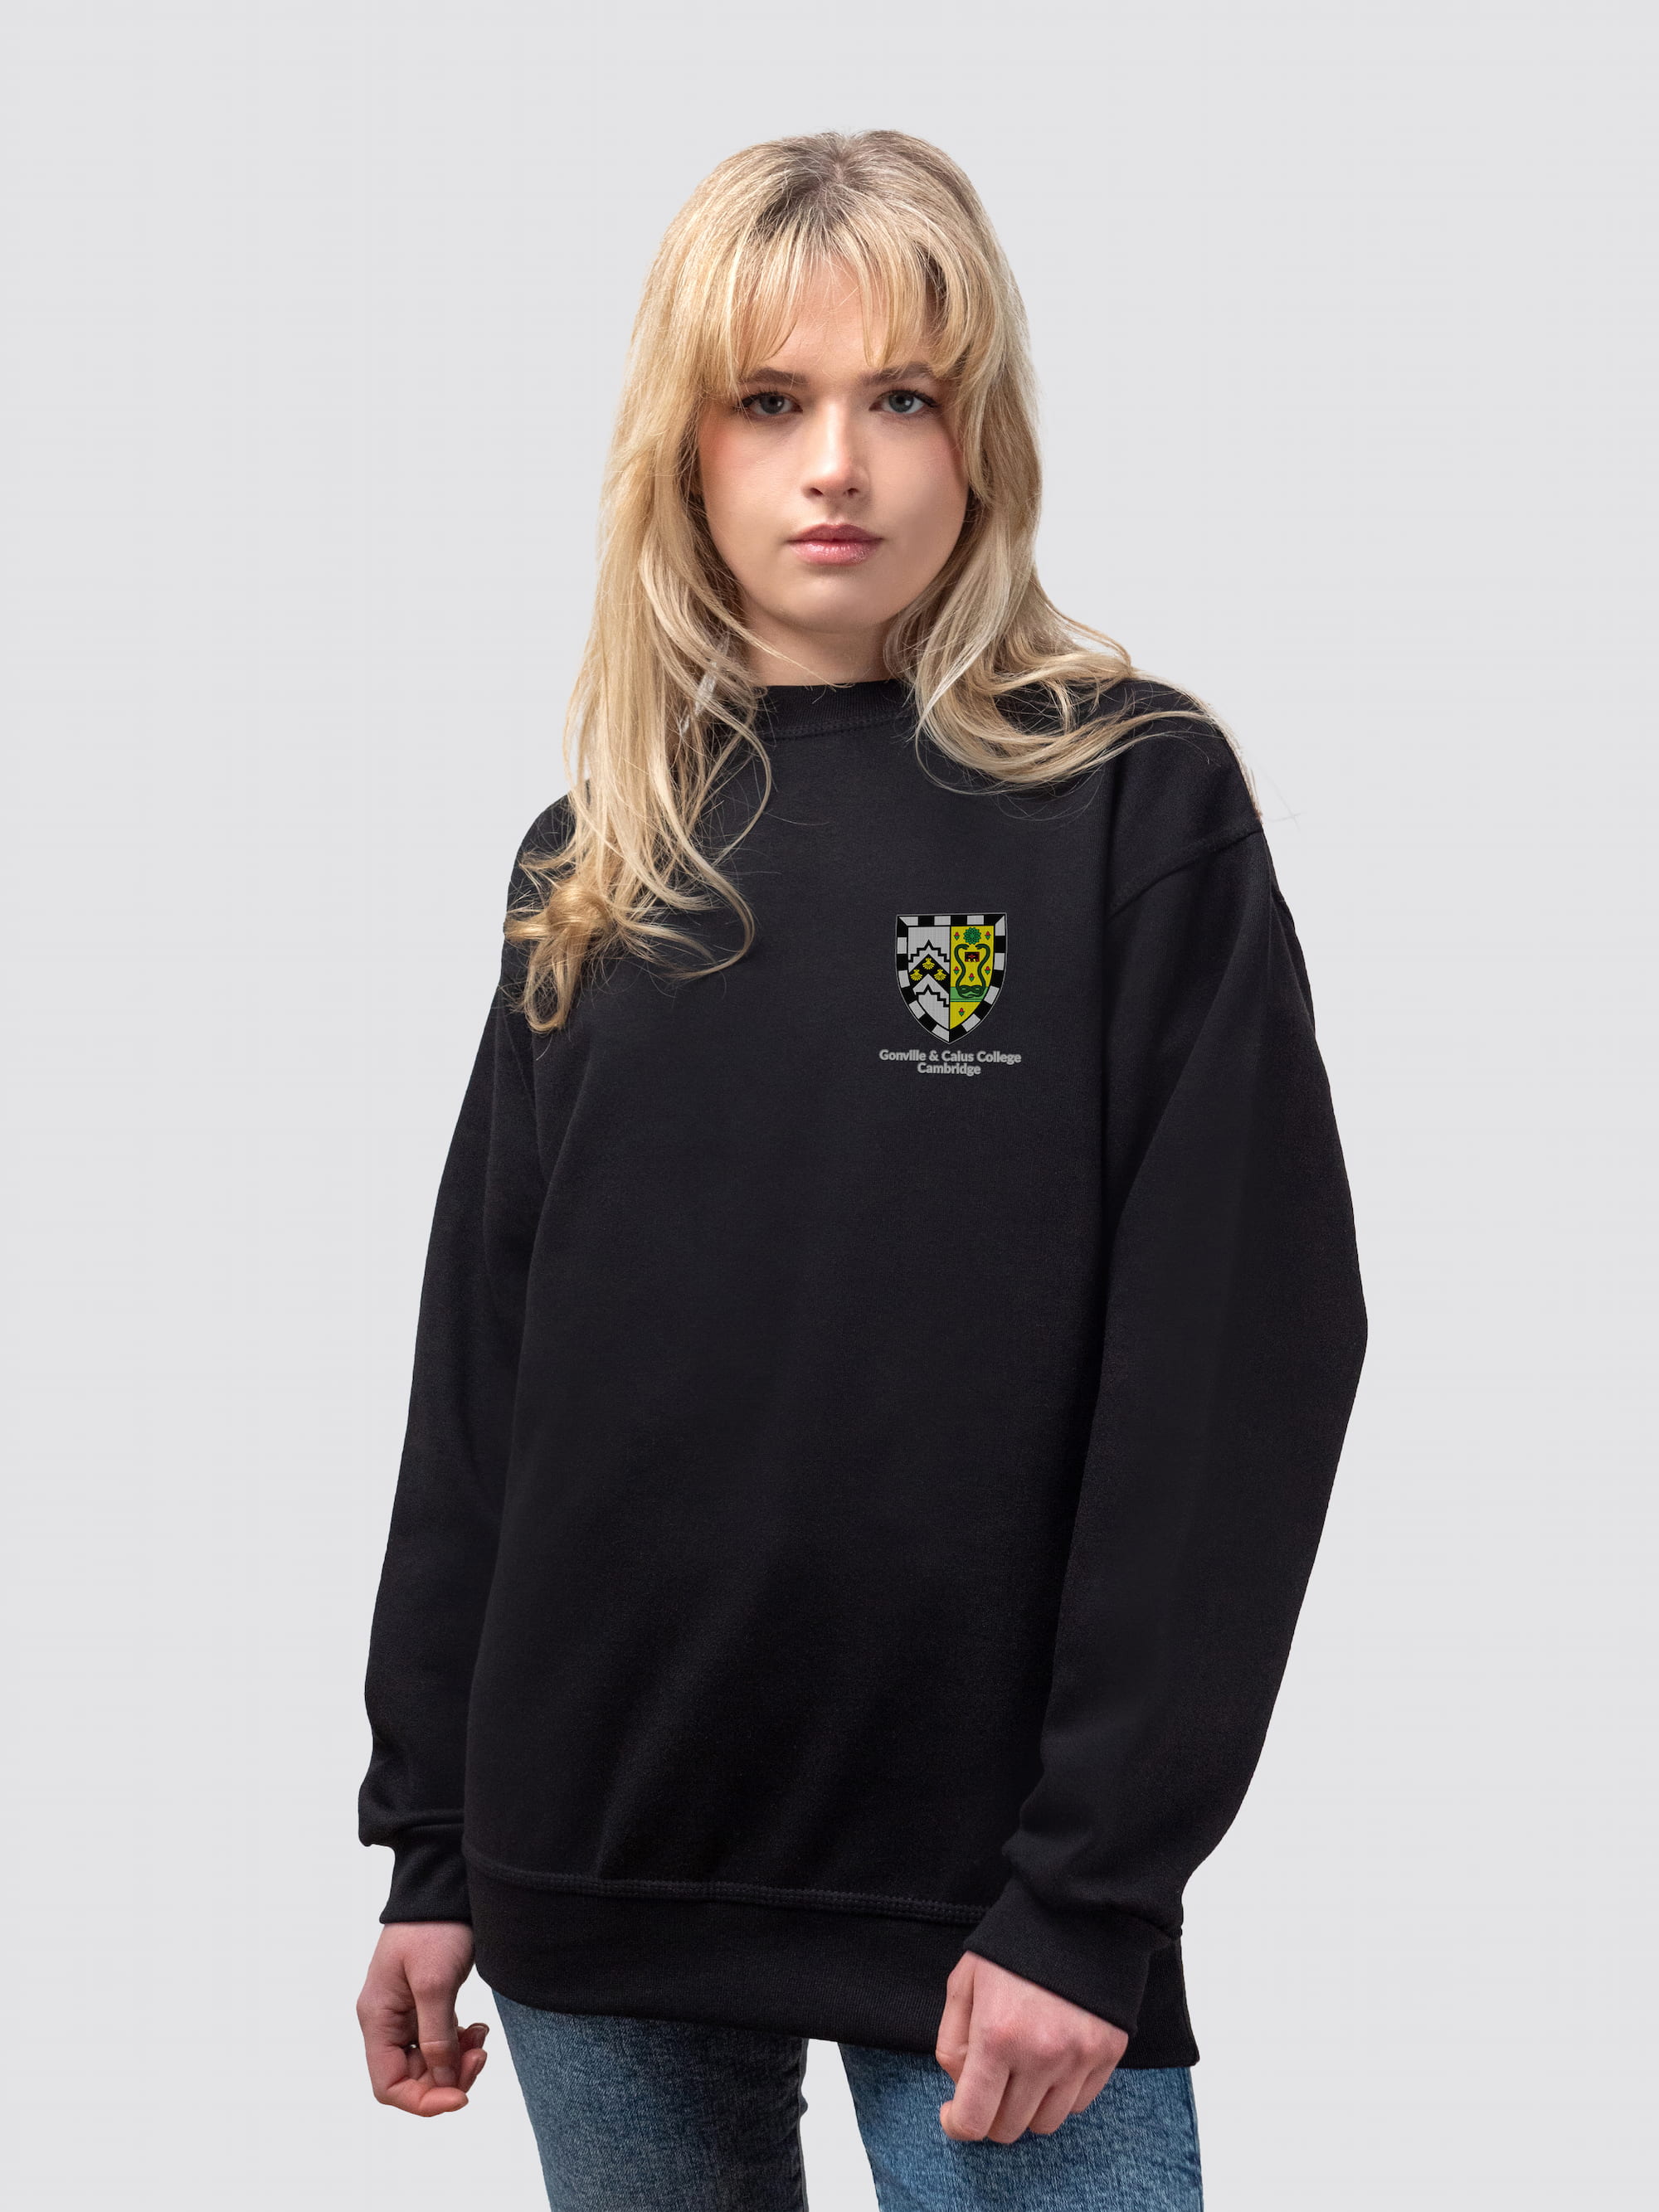 Gonville & Caius crest on the front of a black, crew-neck sweatshirt